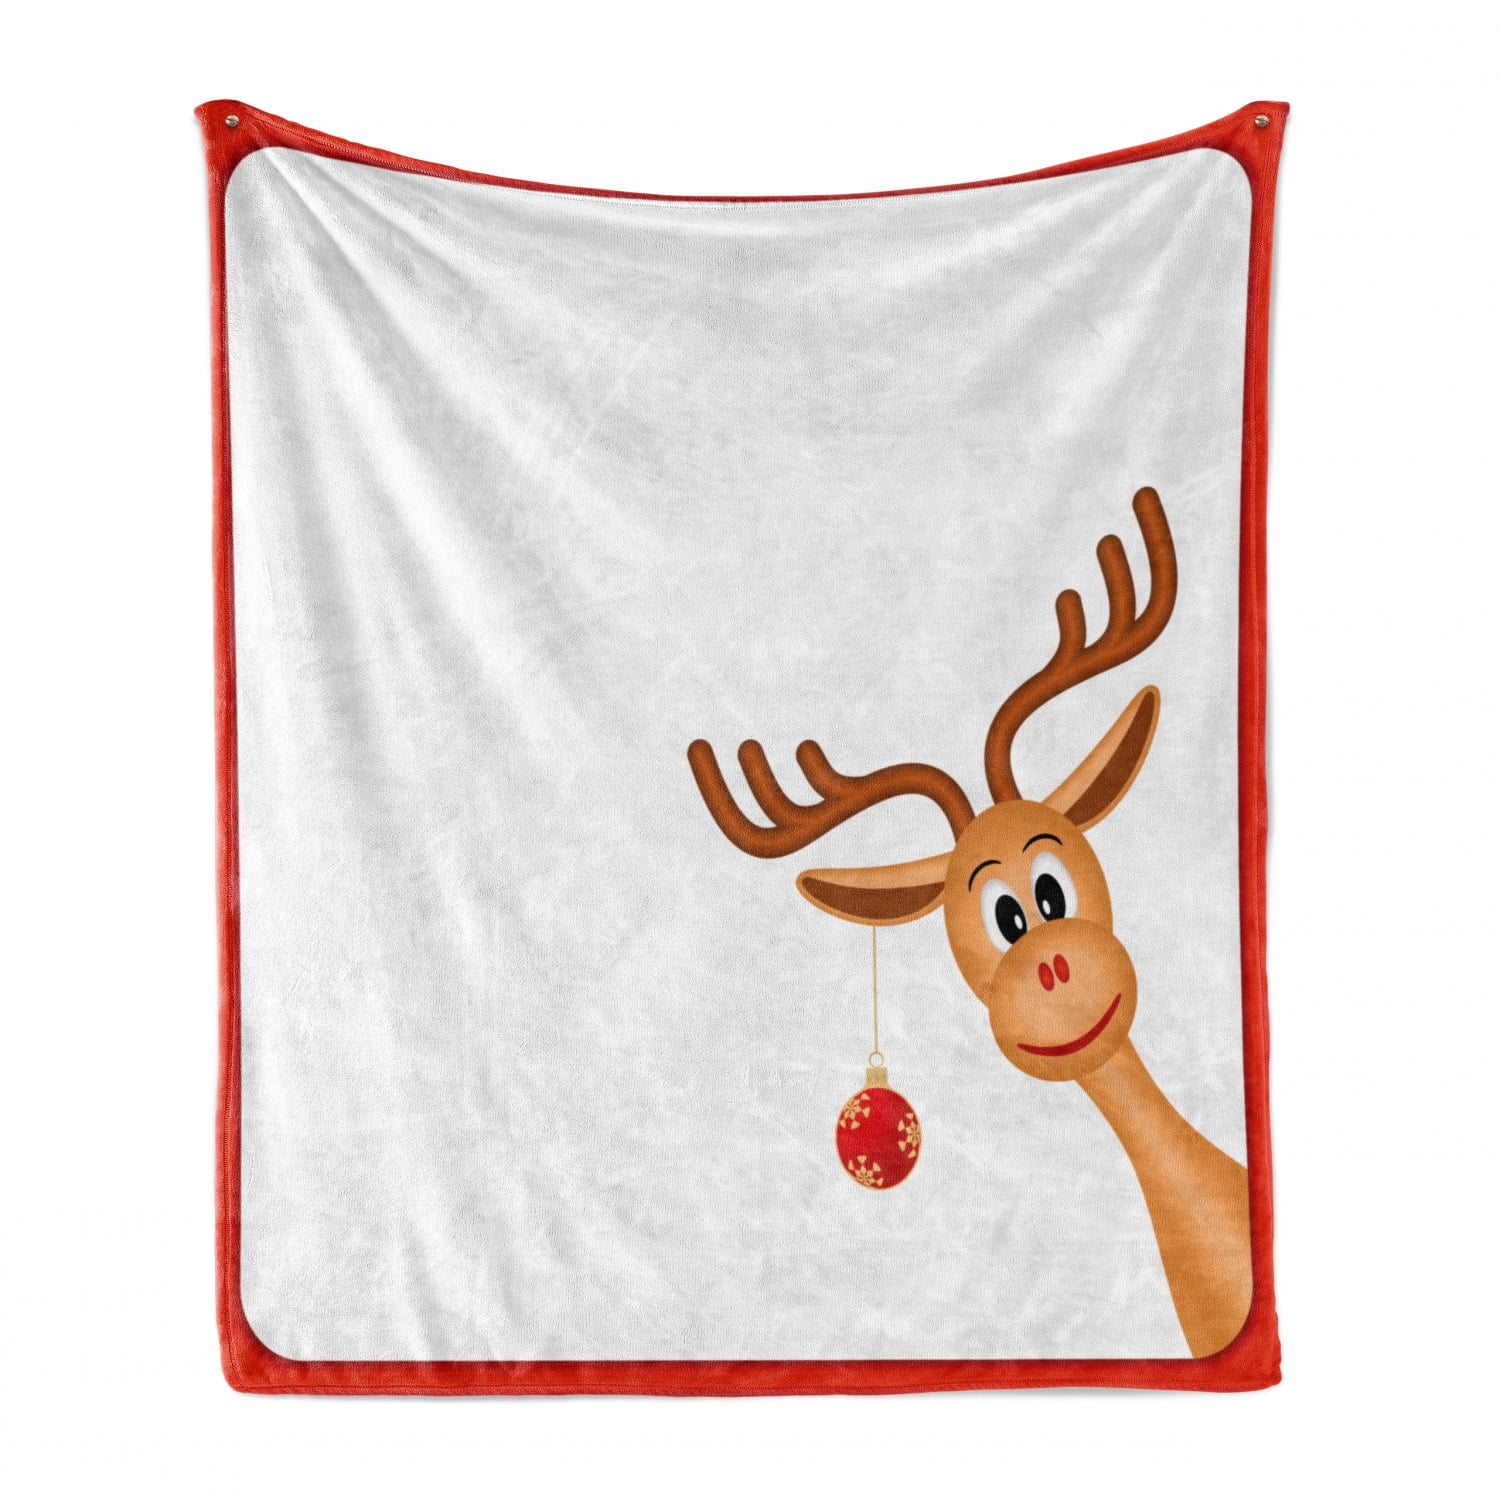 Soft Fleece Throw Blanket for Couch,Christmas Reindeer Antlers,Flannel Bed Blankets Lightweight Plush & Warm Decorative,Red Plaid Check Buffalo,Sofa Travel Camping Blankets for All Seasons,50x60inch